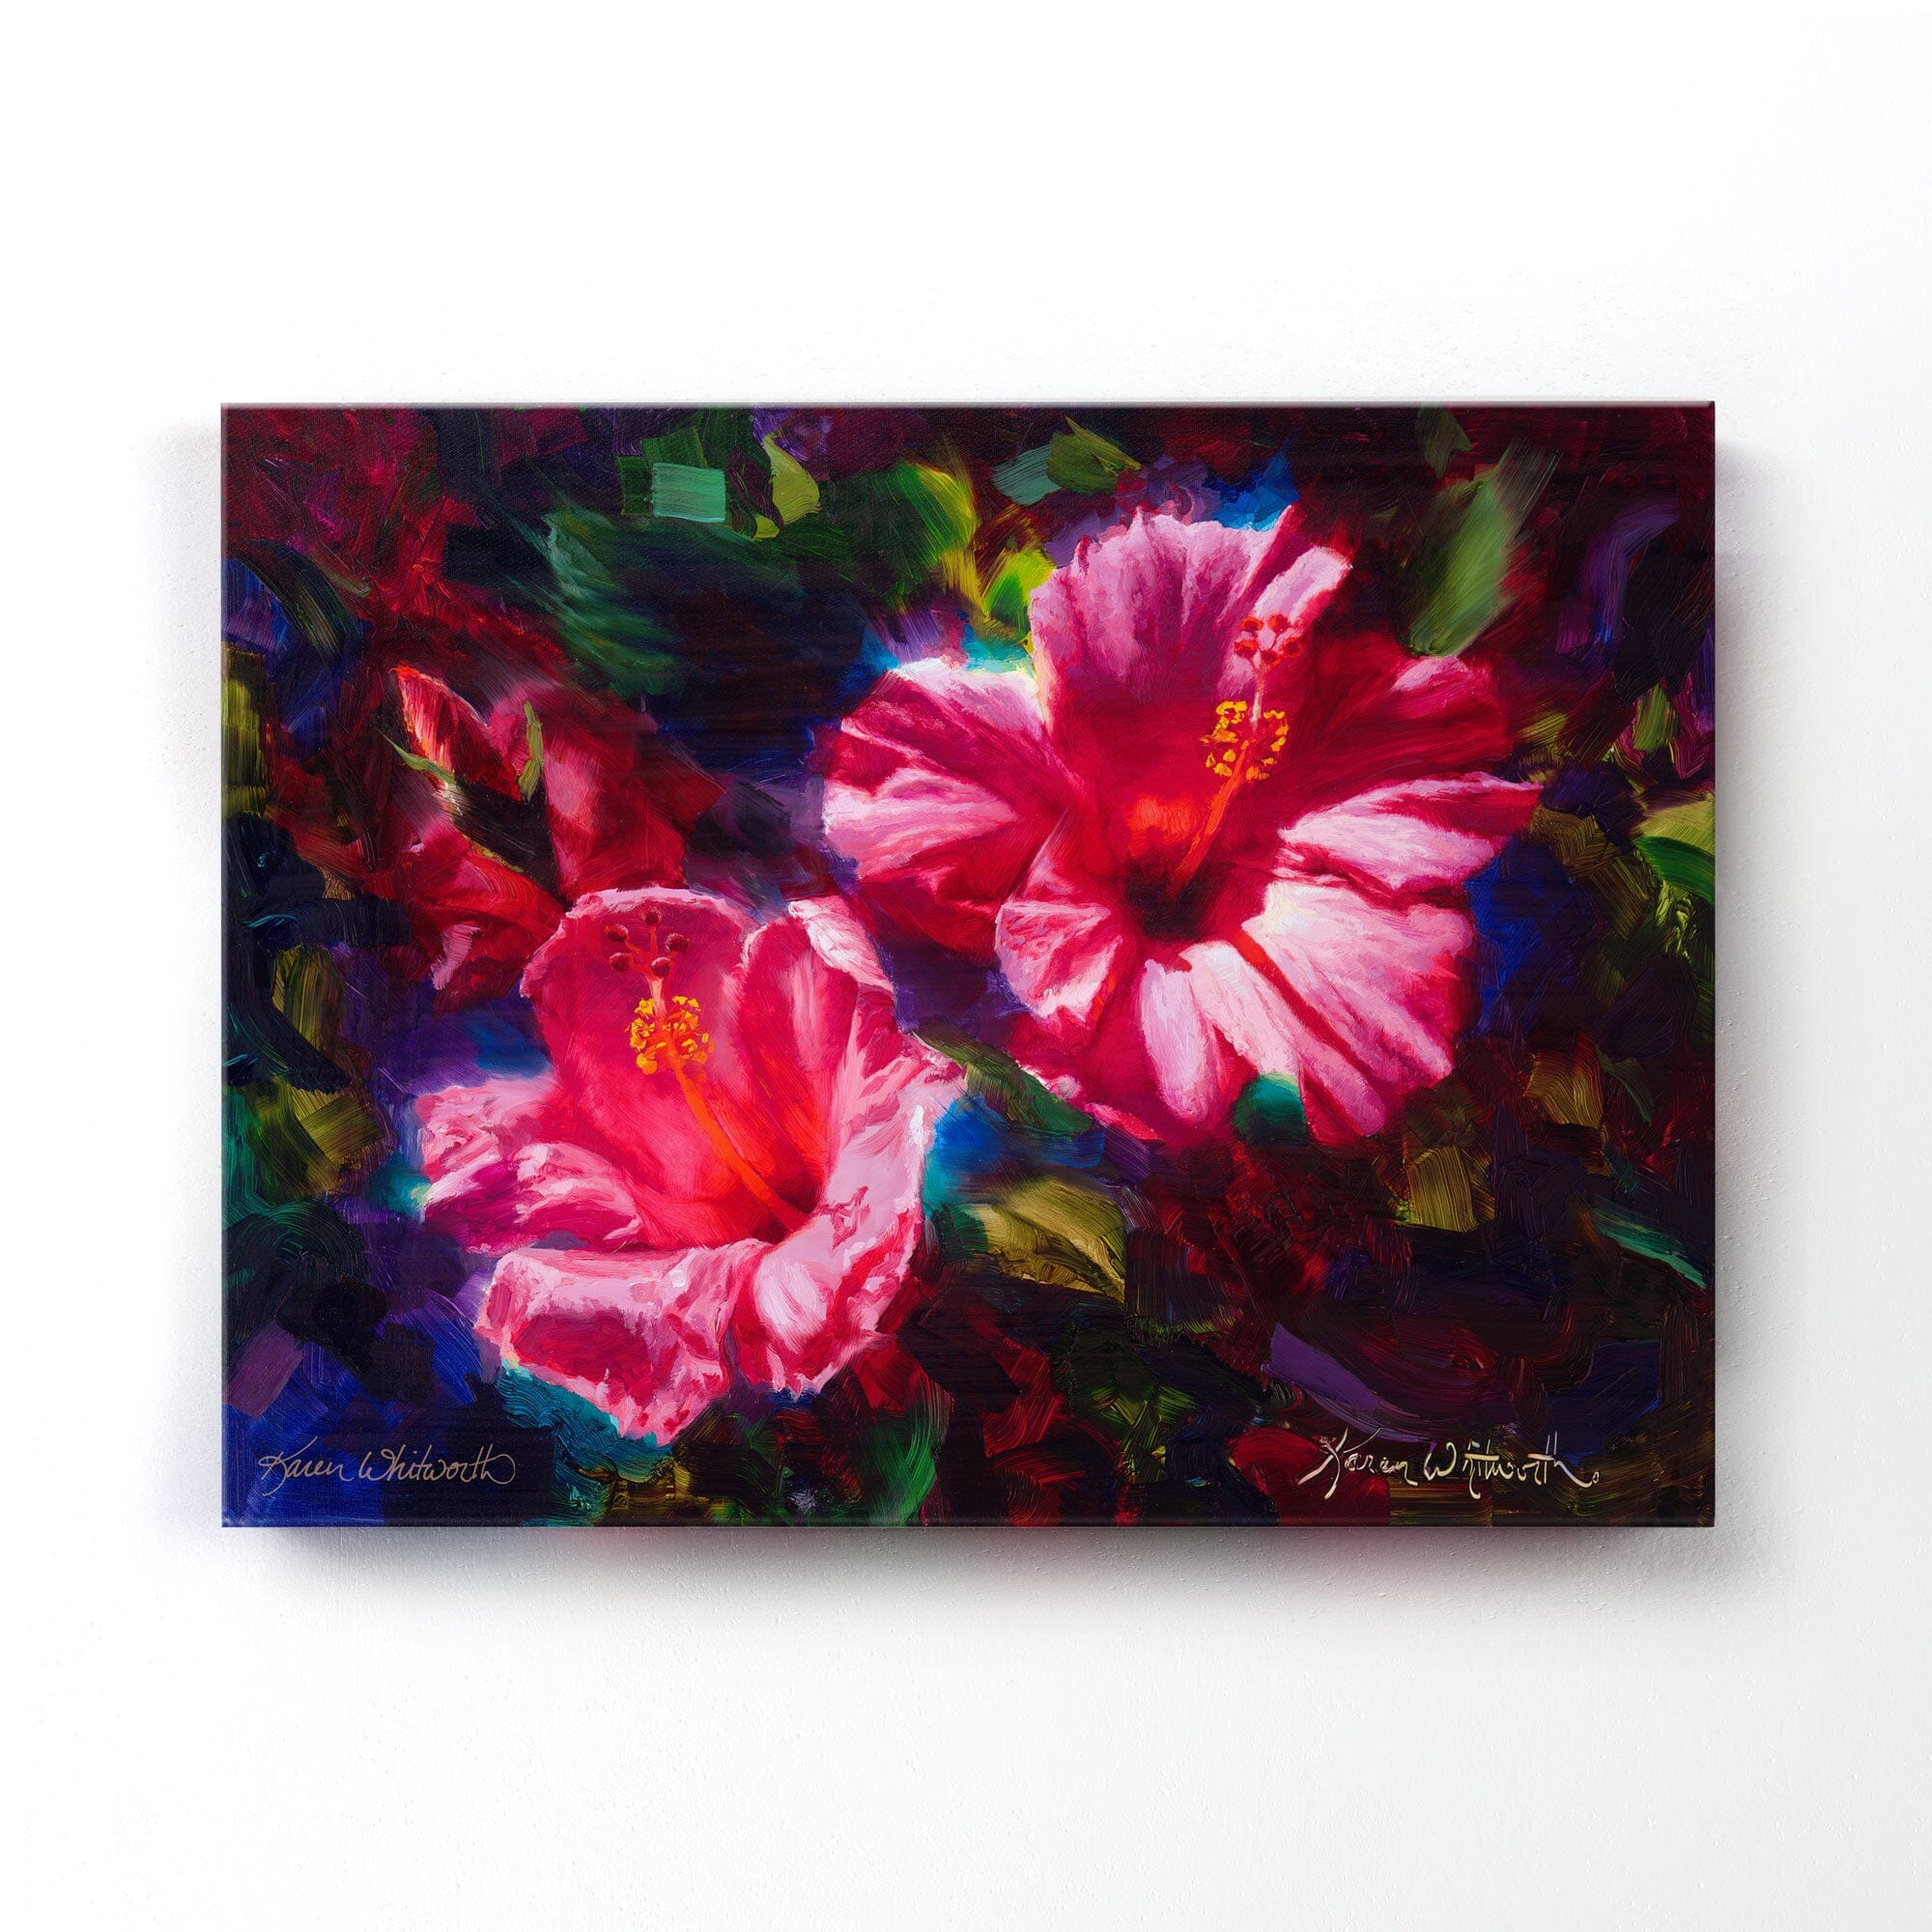 pink hibiscus Hawaiian flower painting on canvas by Hawaii artist Karen Whitworth. The artwork is hanging on a white wall.